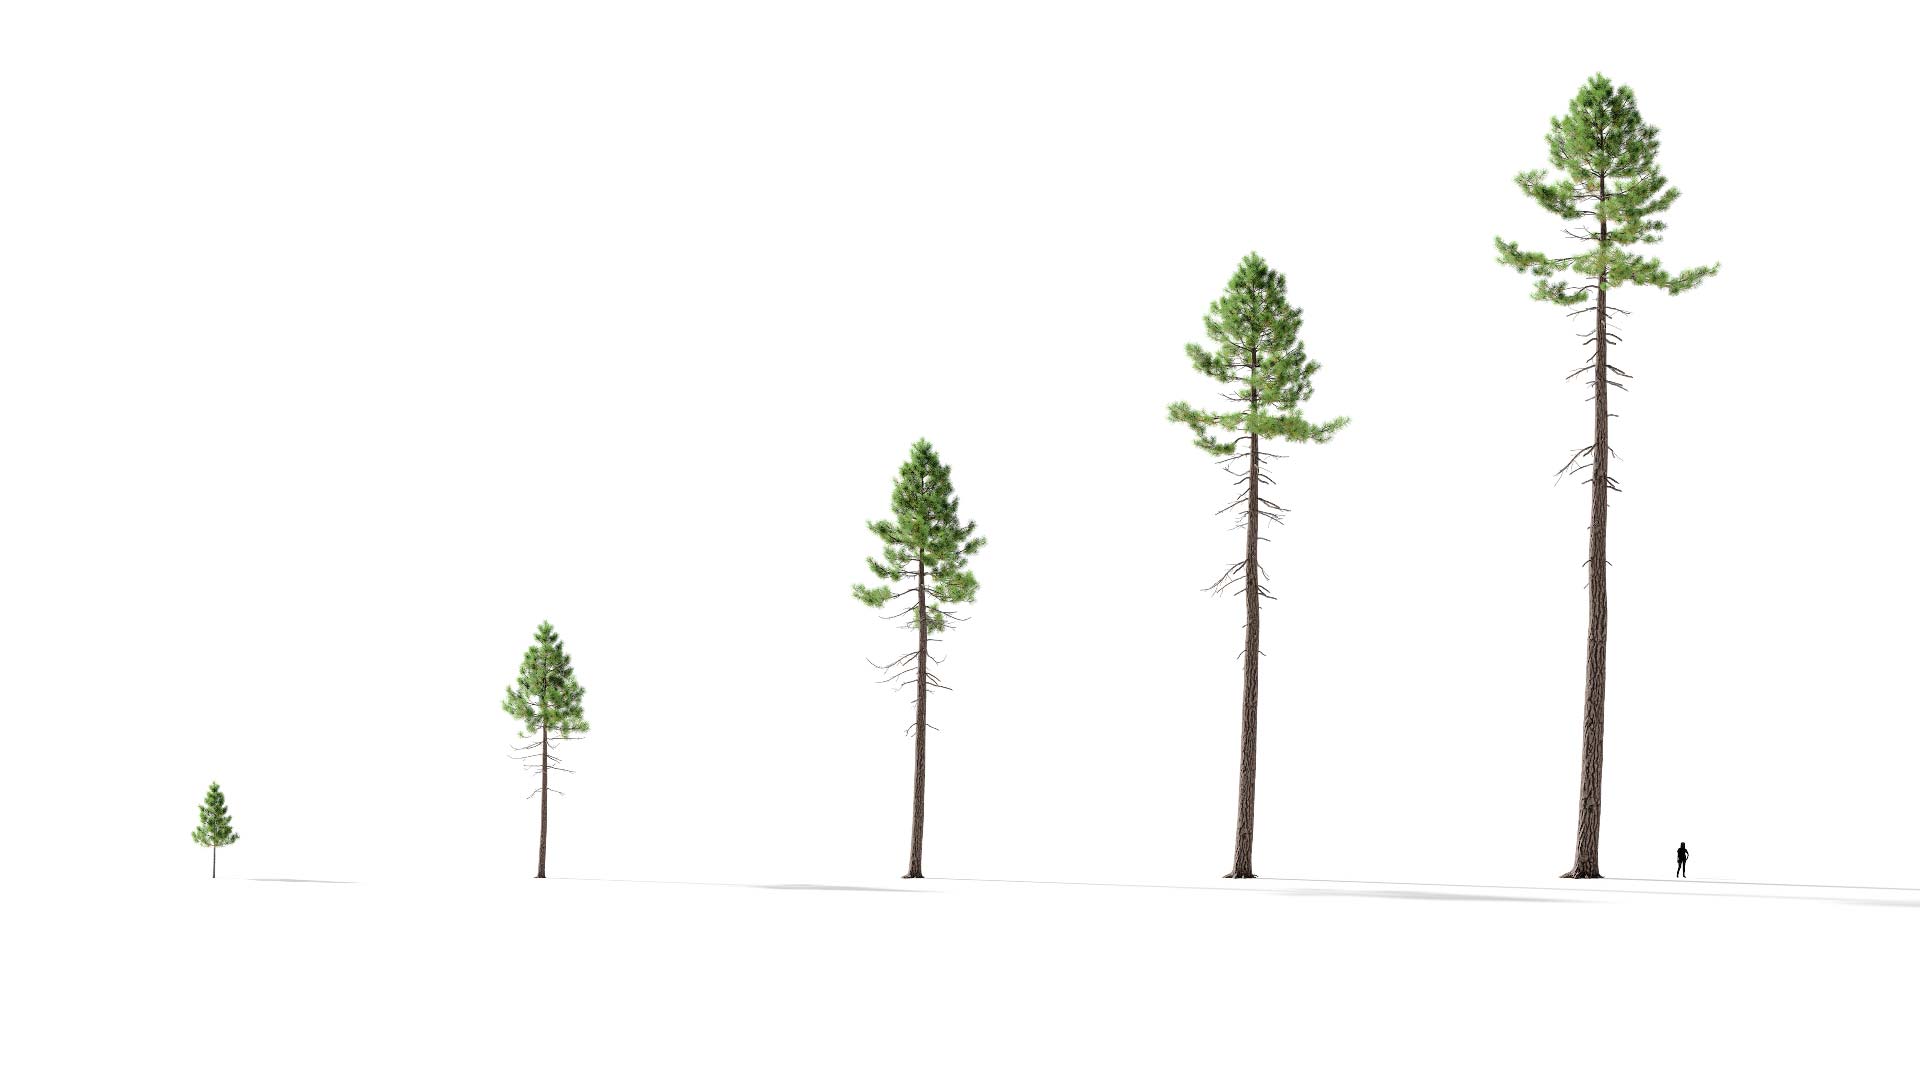 3D model of the Jeffrey pine forest Pinus jeffreyi forest maturity variations